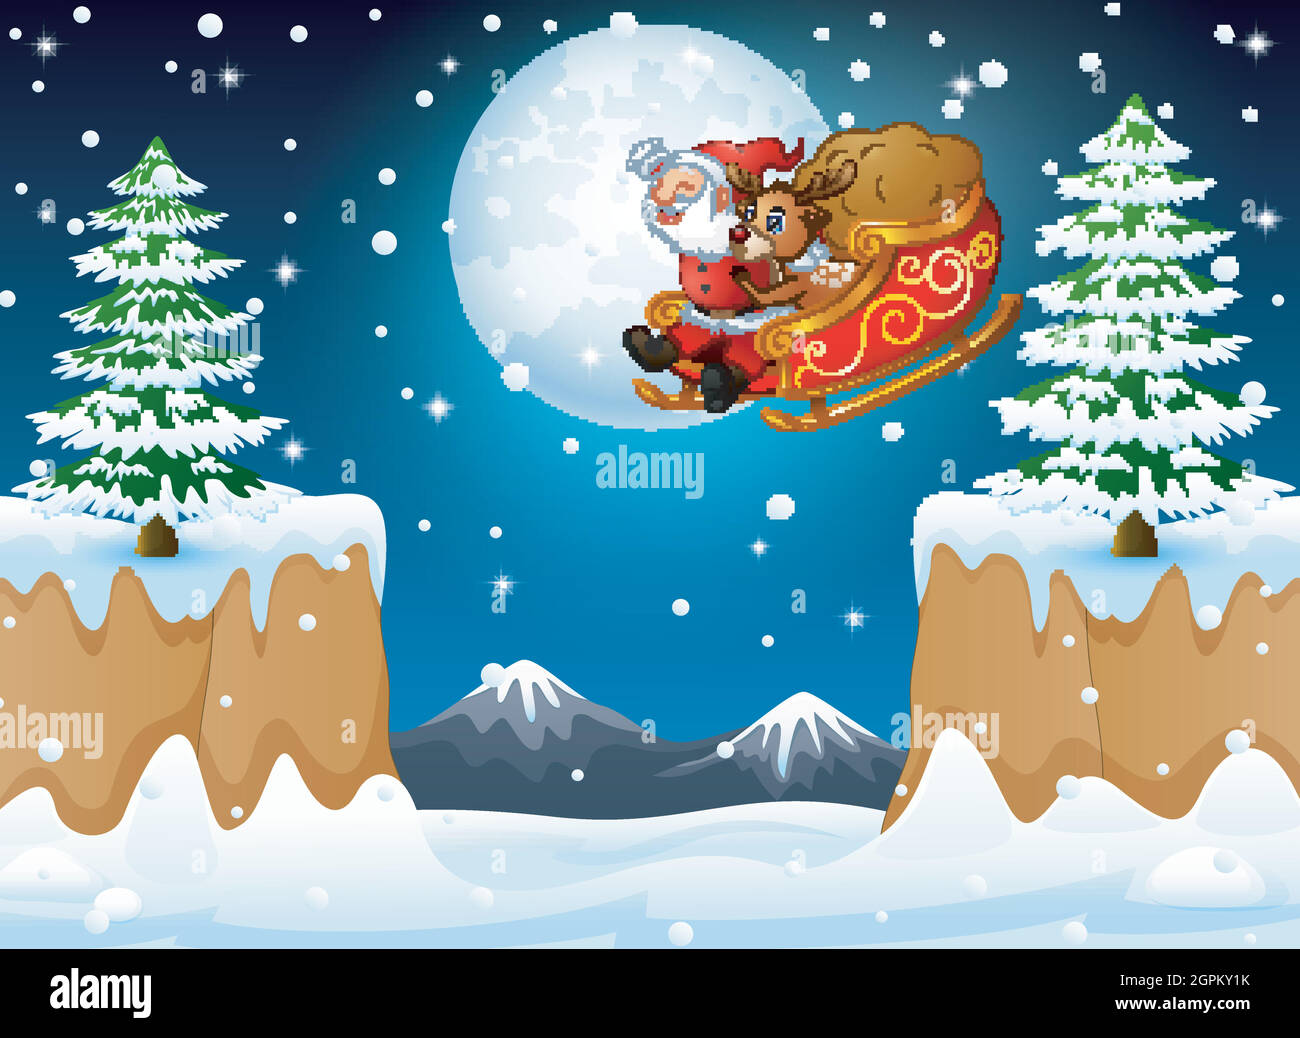 Santa Claus And Elf Riding Deer Sleigh Flying Over Hill Stock